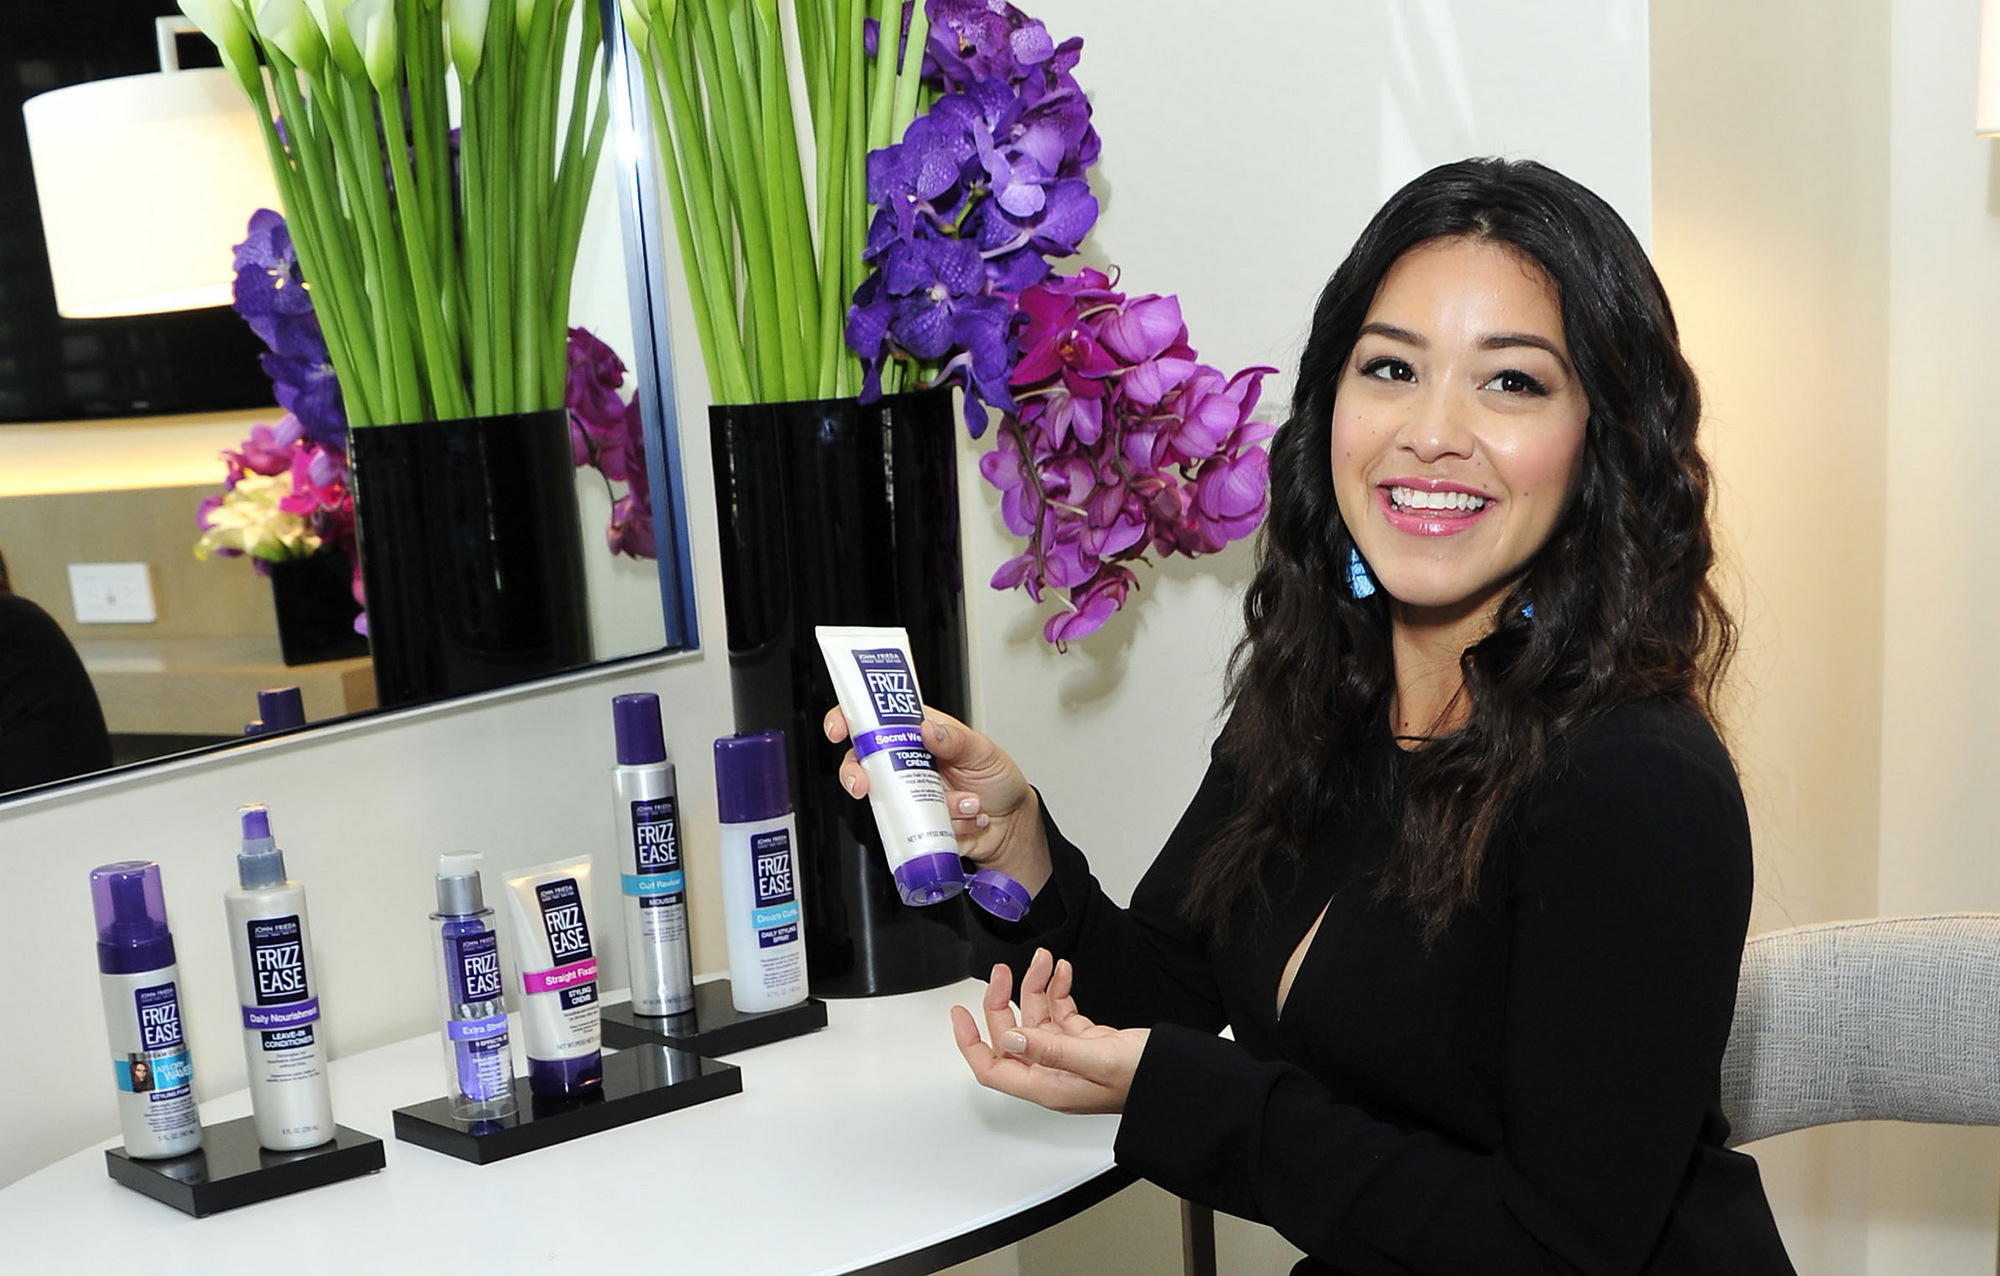 Hair Trends: Award-winning actress Gina Rodriguez brings her power to the fight against frizz with John Frieda Hair Care